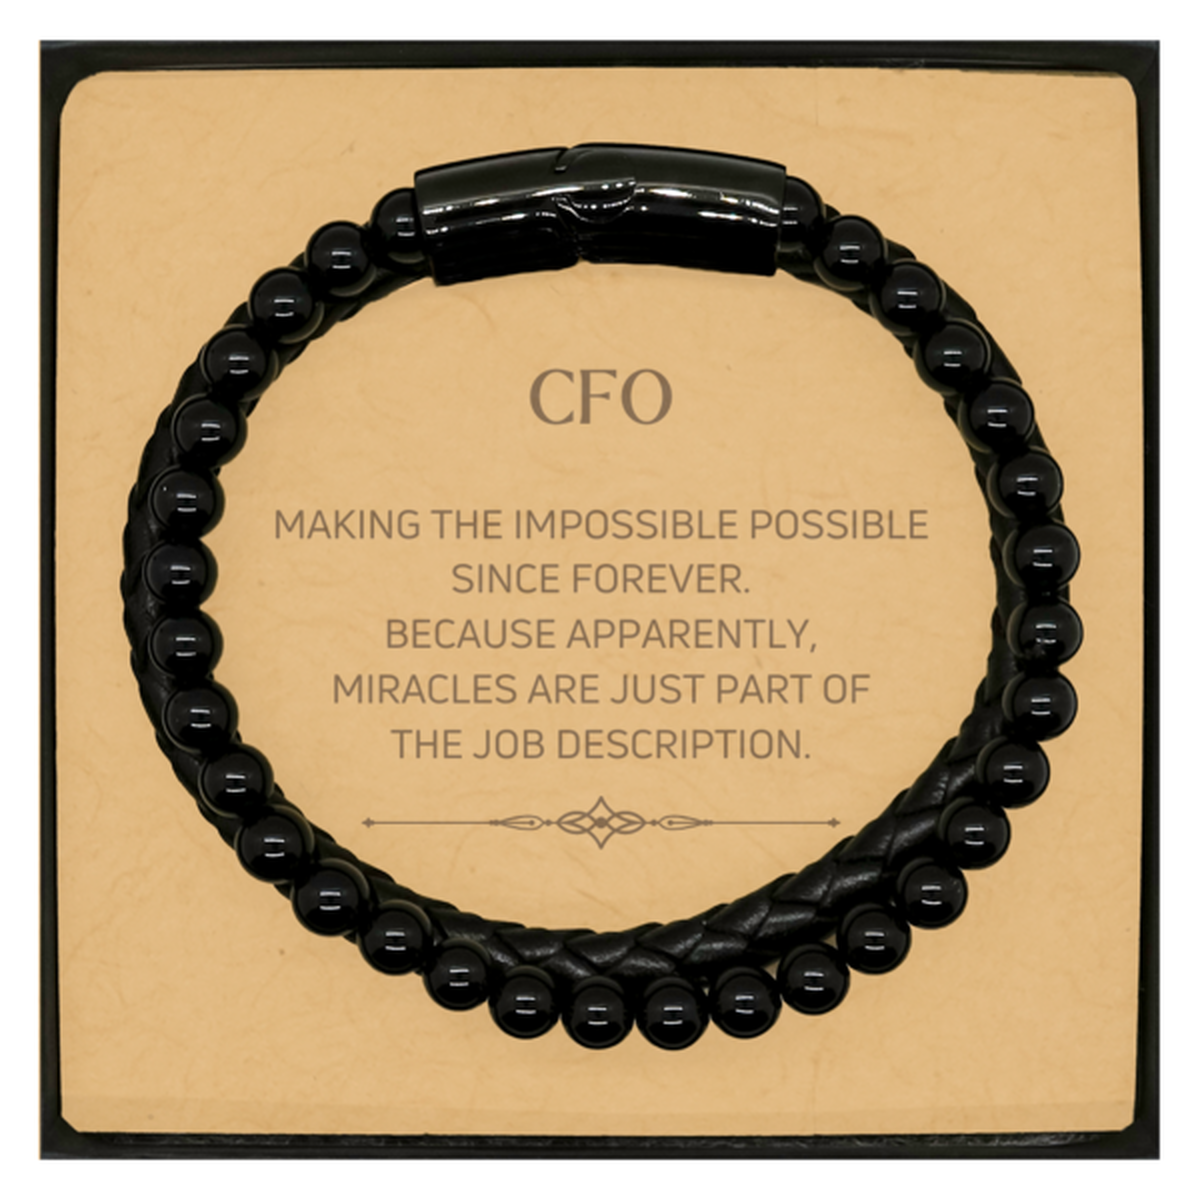 Funny CFO Gifts, Miracles are just part of the job description, Inspirational Birthday Christmas Stone Leather Bracelets For CFO, Men, Women, Coworkers, Friends, Boss